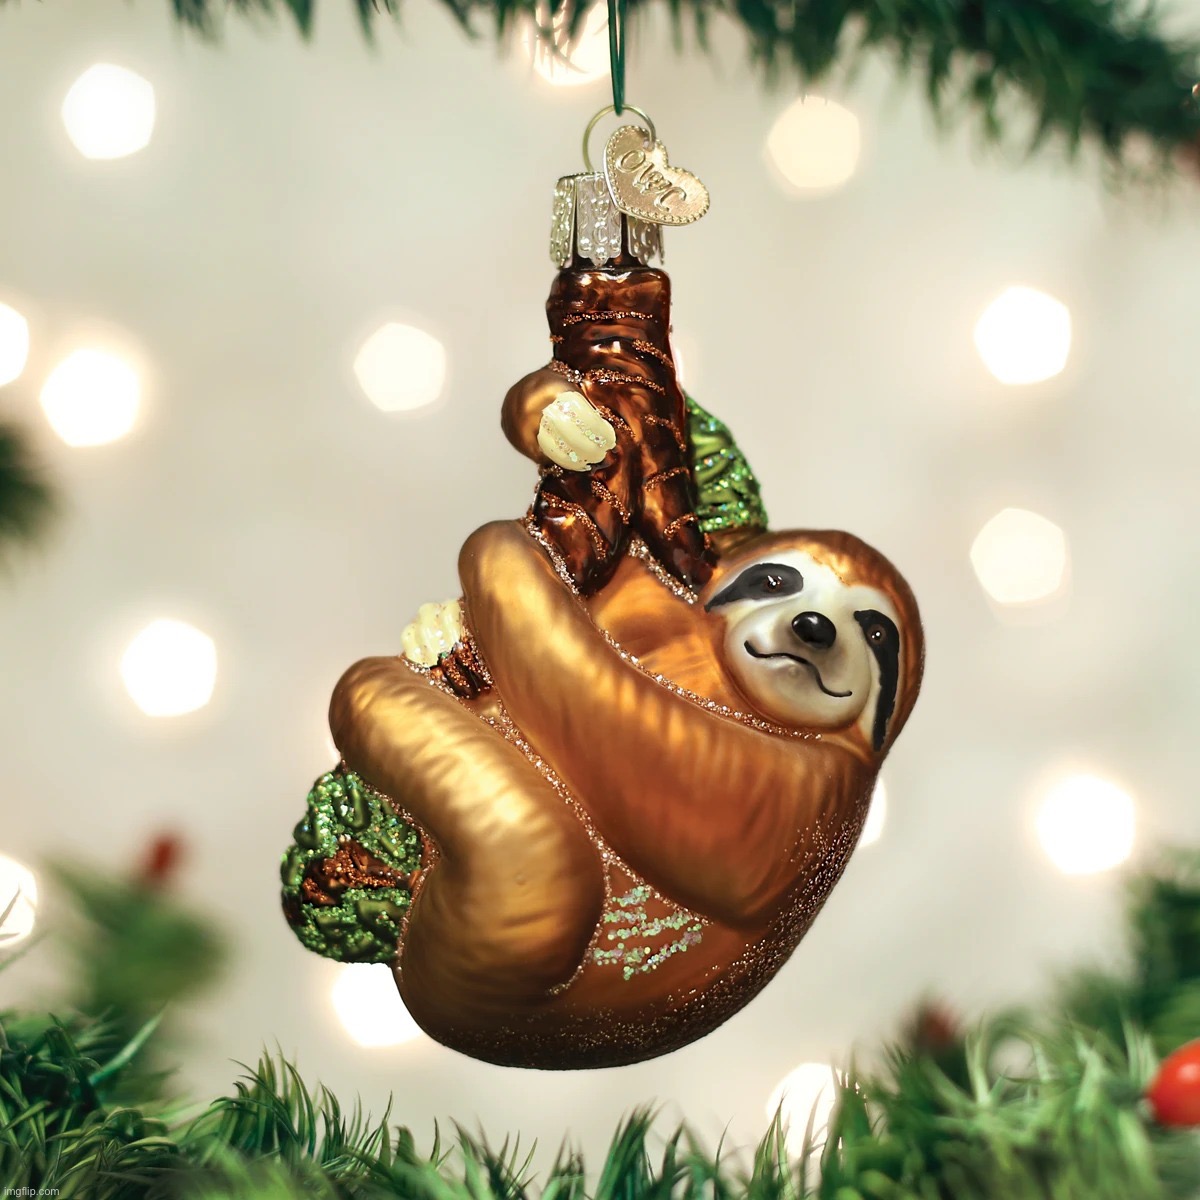 Sloth ornament | image tagged in sloth ornament | made w/ Imgflip meme maker